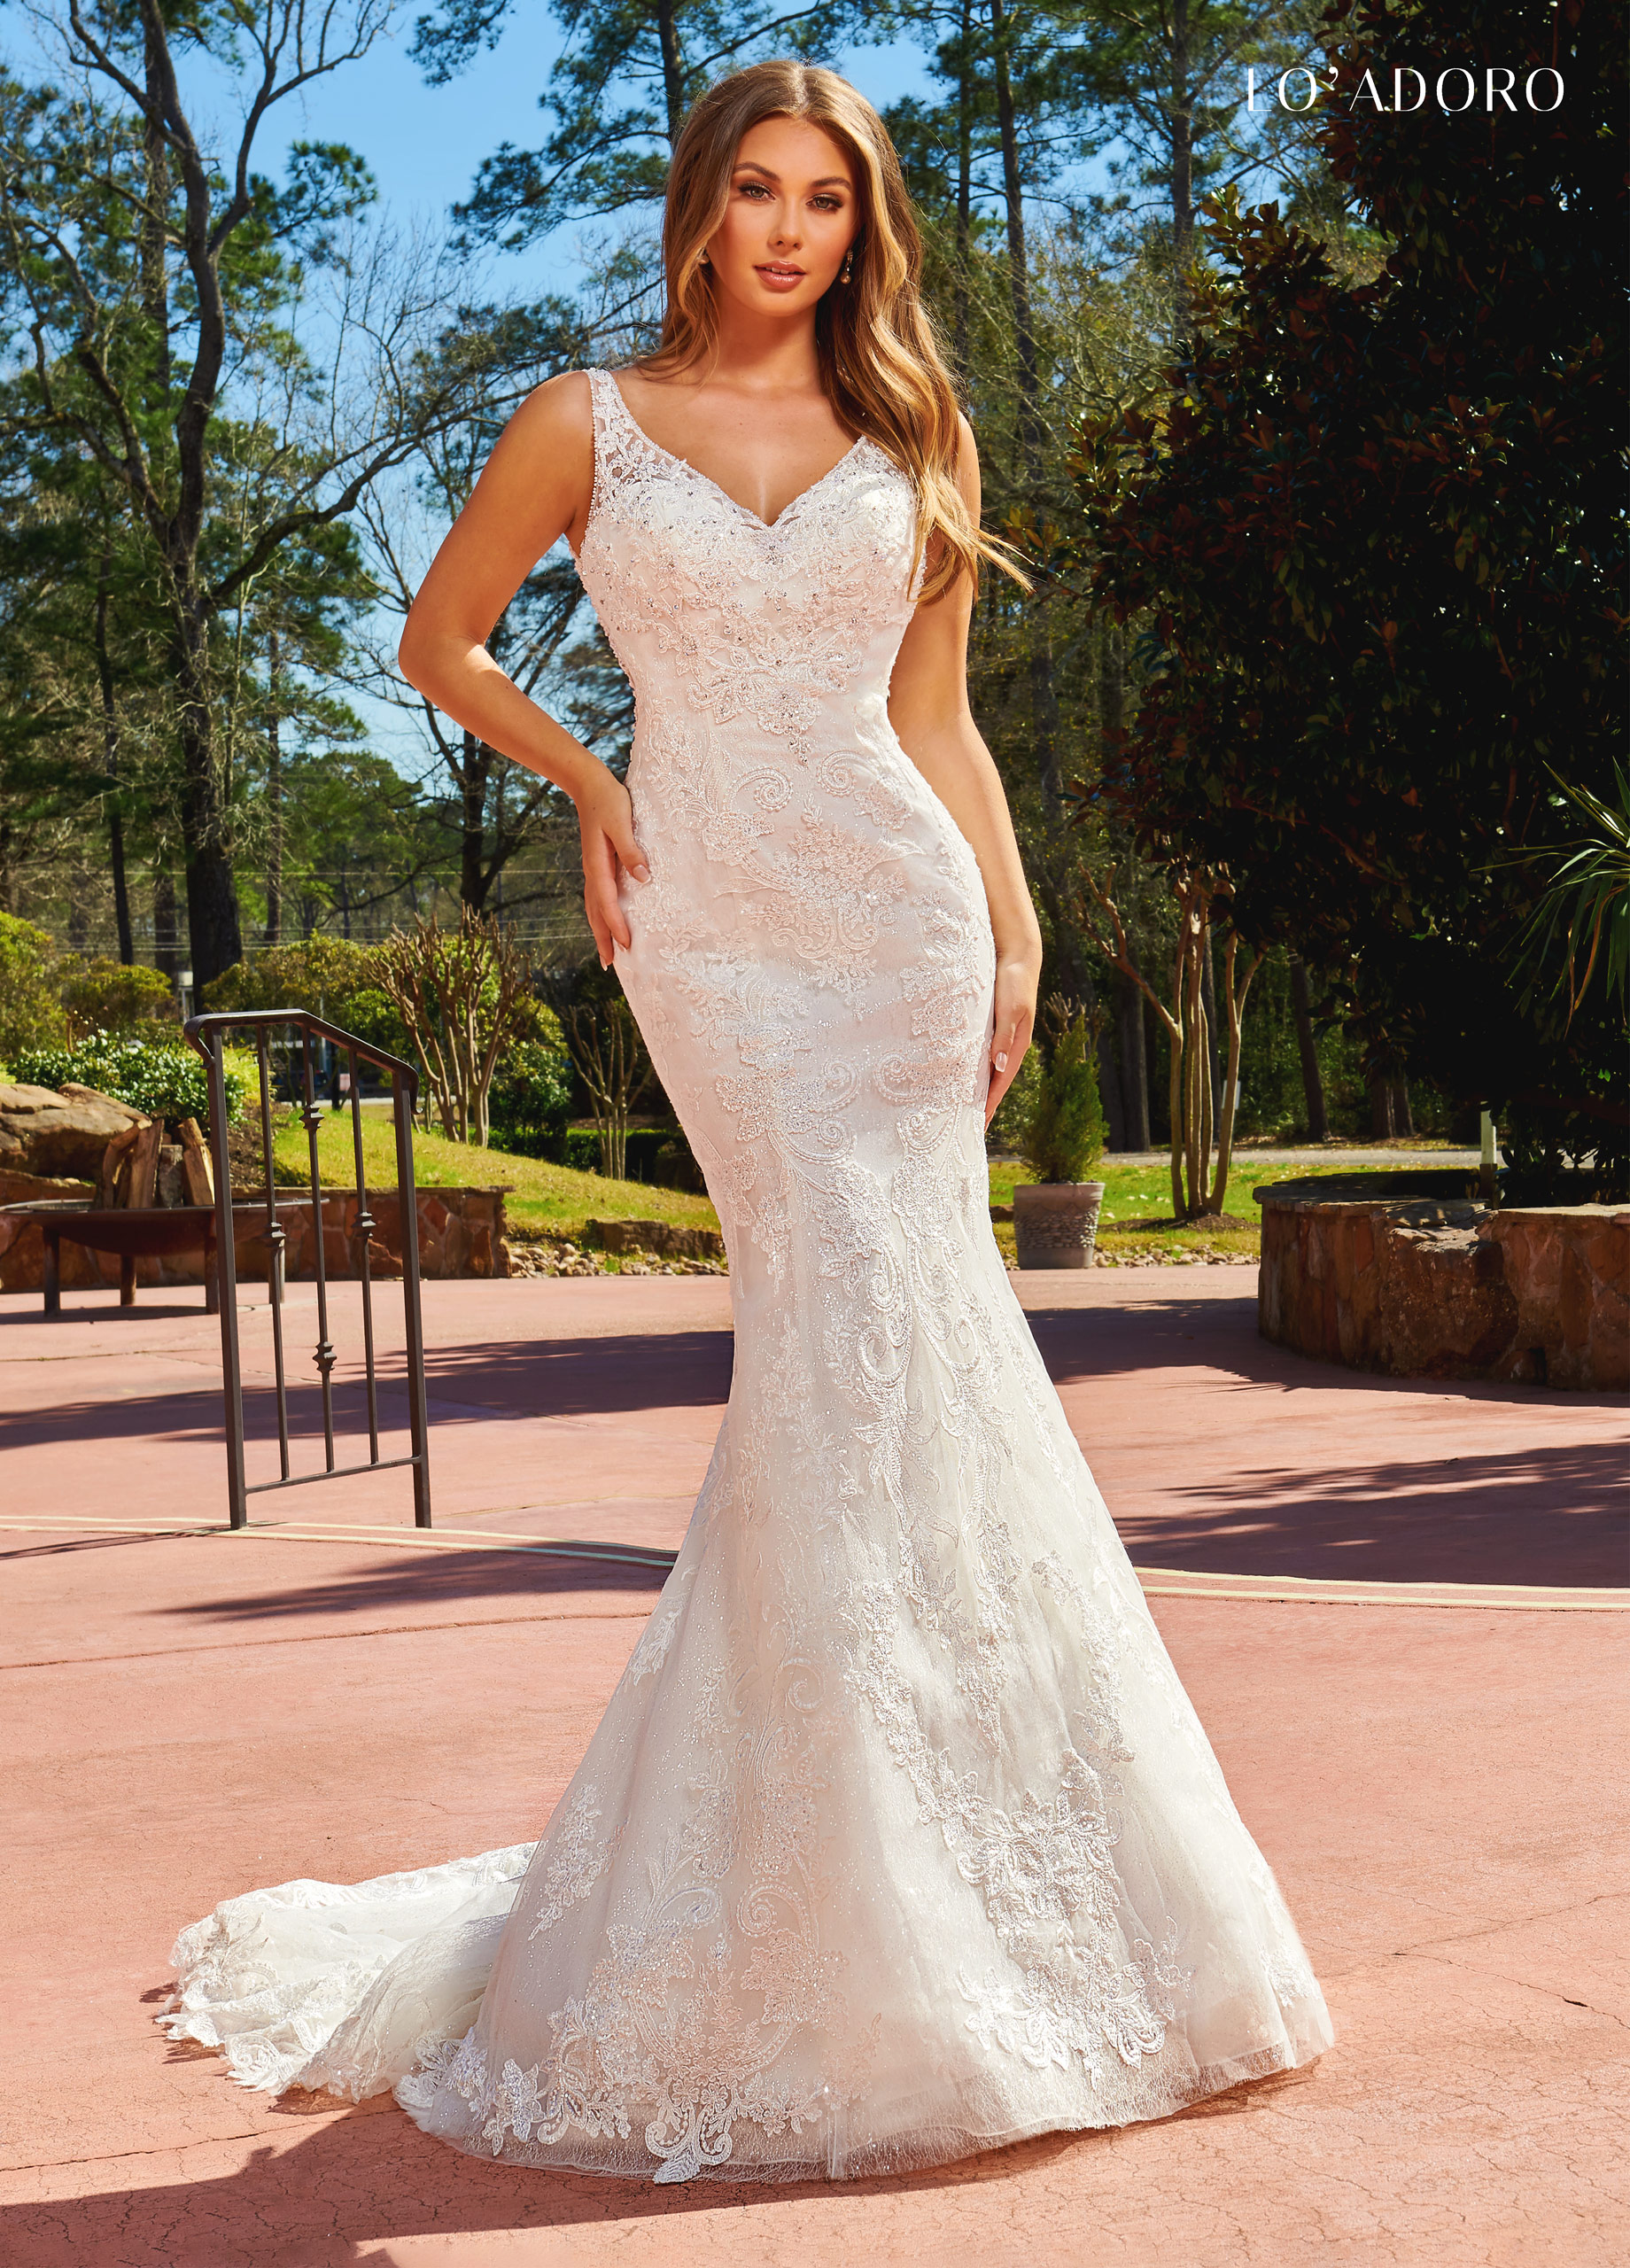 V-Neck Fit & Flare Lo' Adoro Bridal in IVORY Color